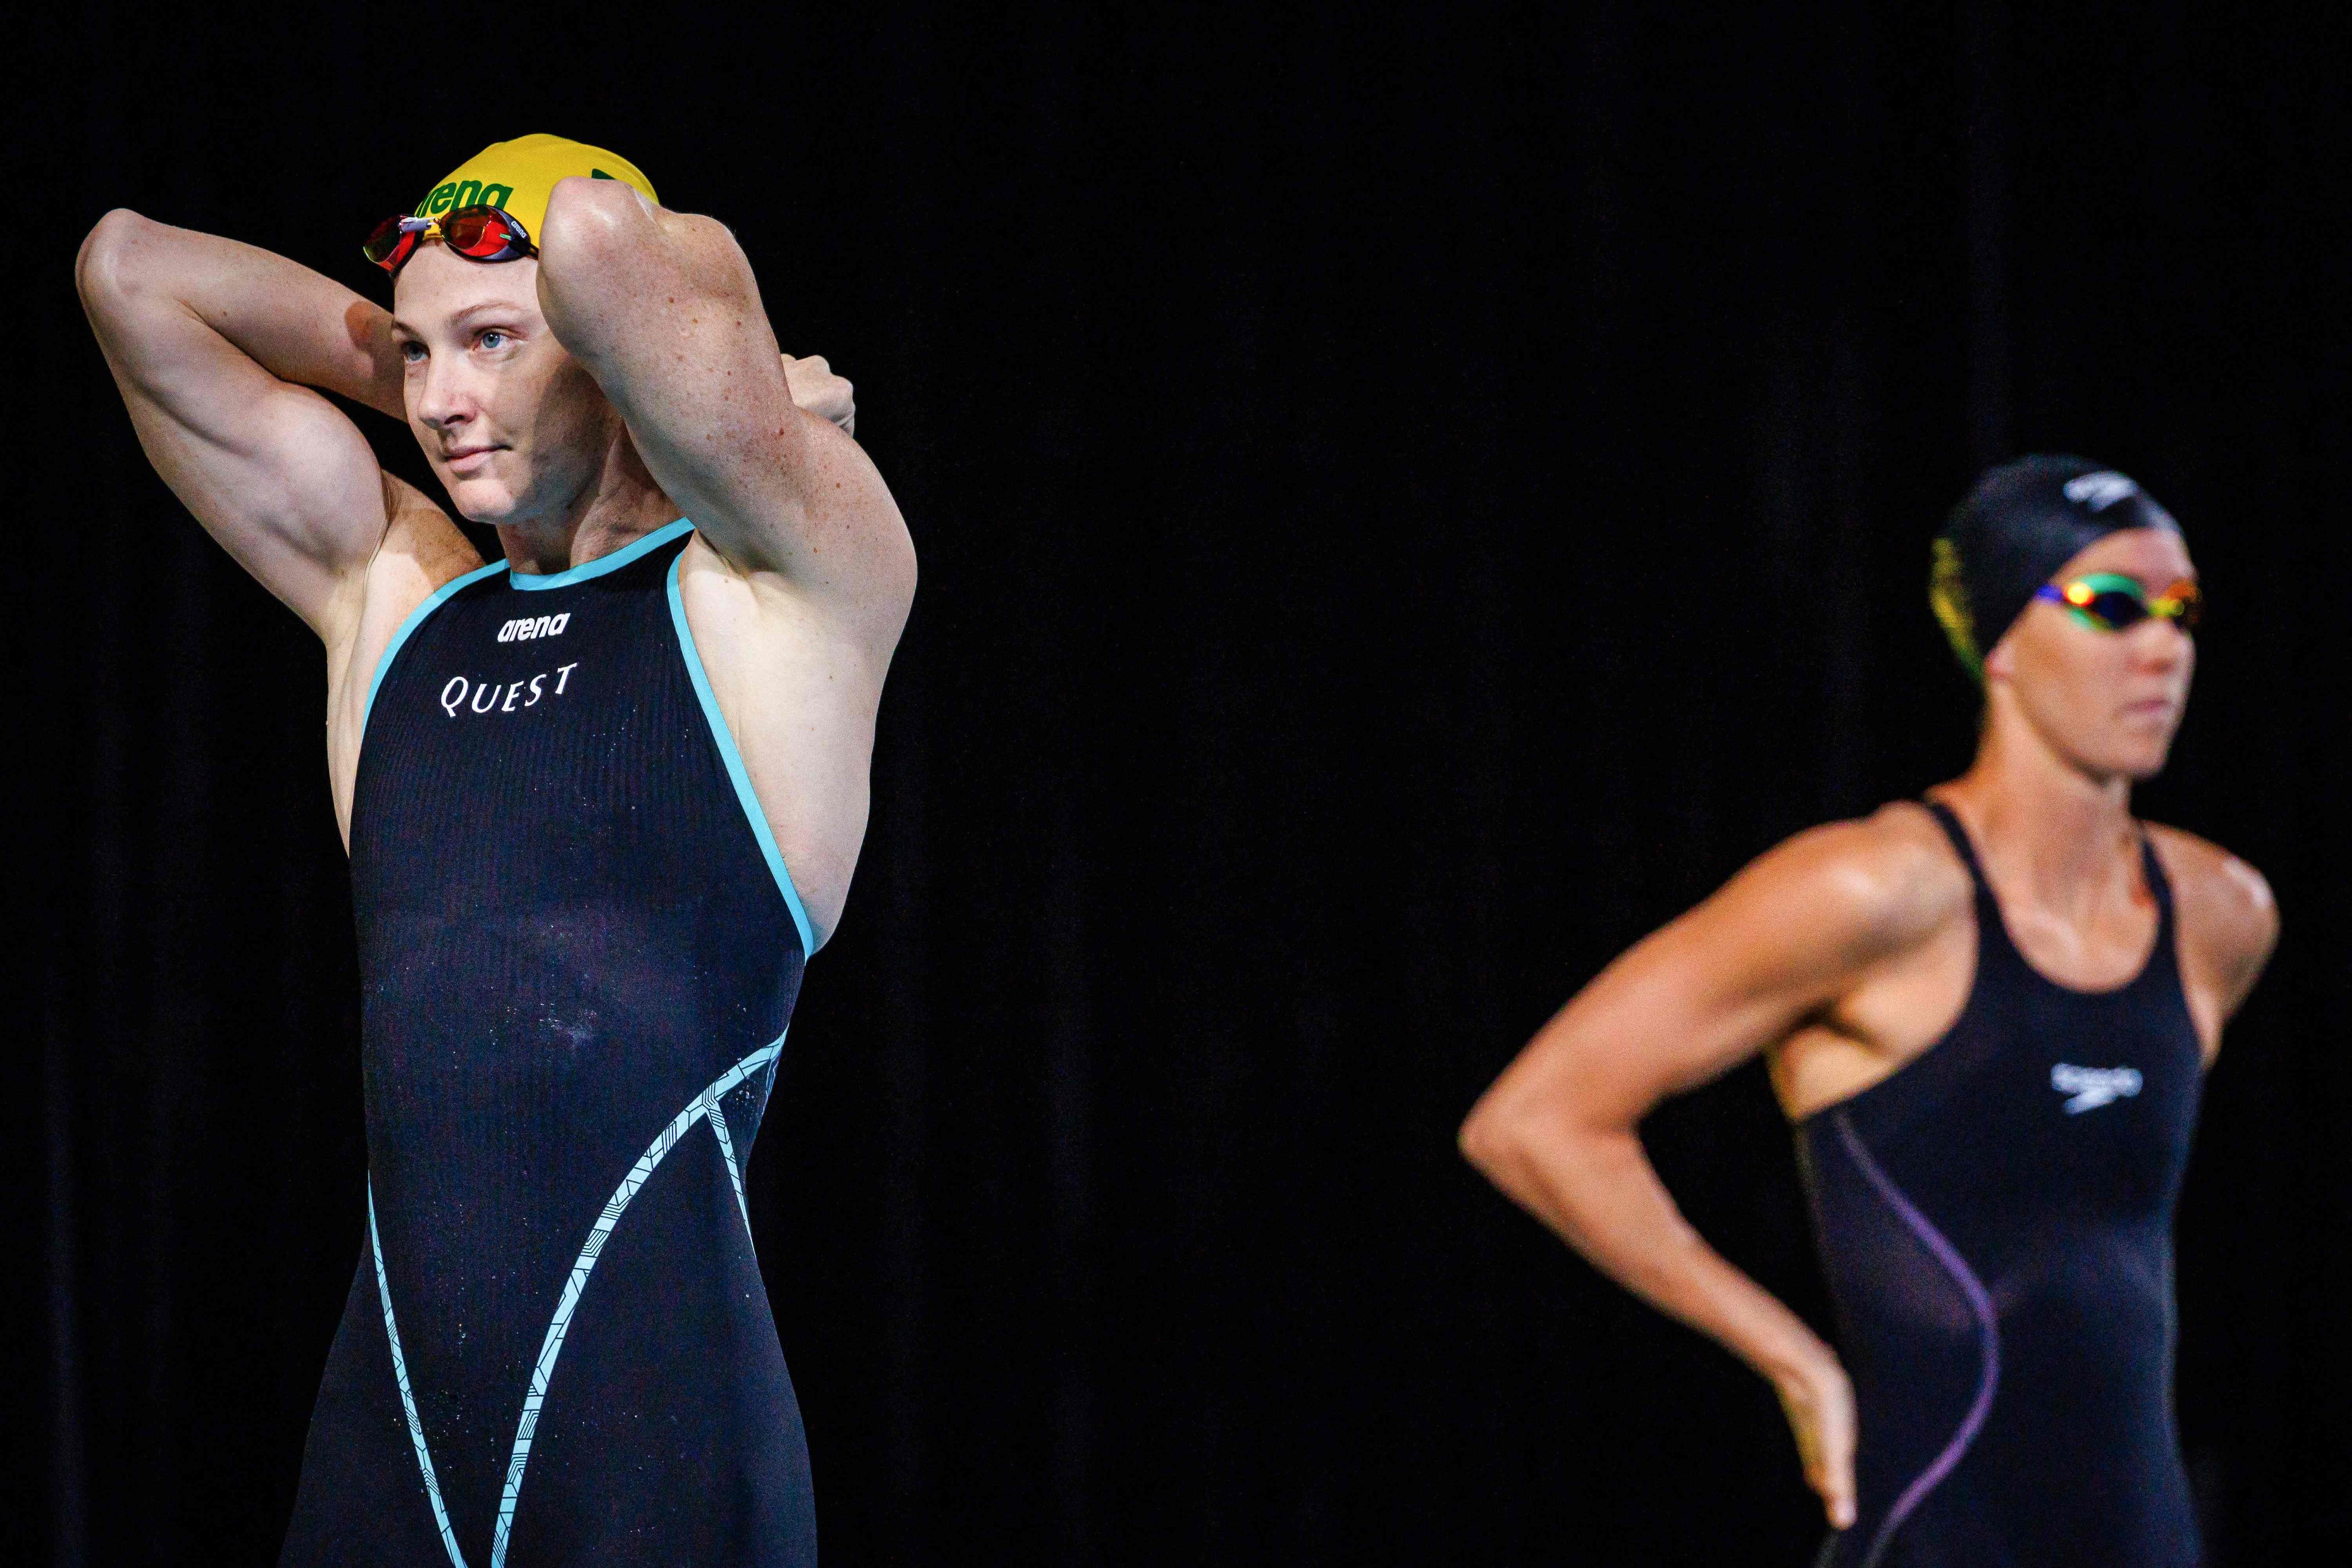 Australia’s Cate Campbell (left) and Emma McKeon prepare for the women’s 50m freestyle final during the Australian Swimming Trials at Brisbane Aquatic Centre. Photo: AFP